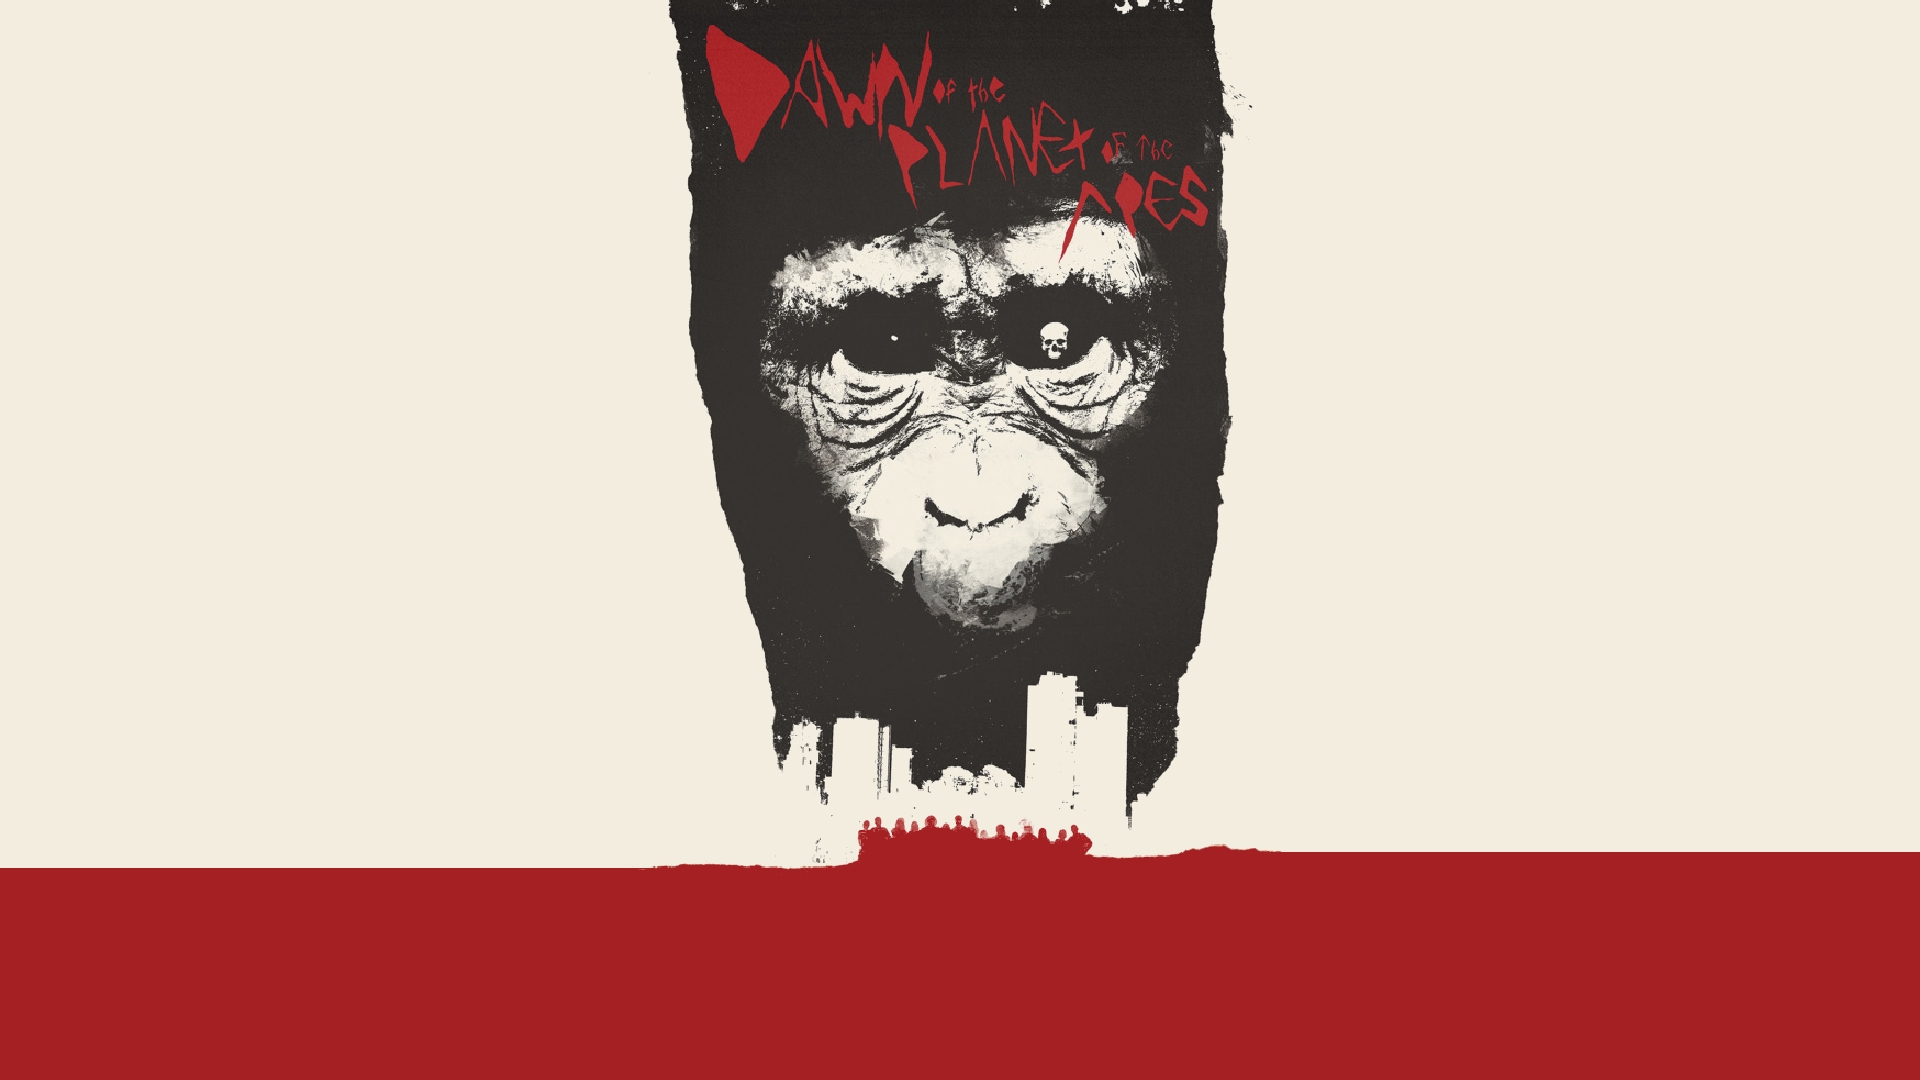 Comics Dawn Of The Planet Of The Apes HD Wallpaper | Background Image